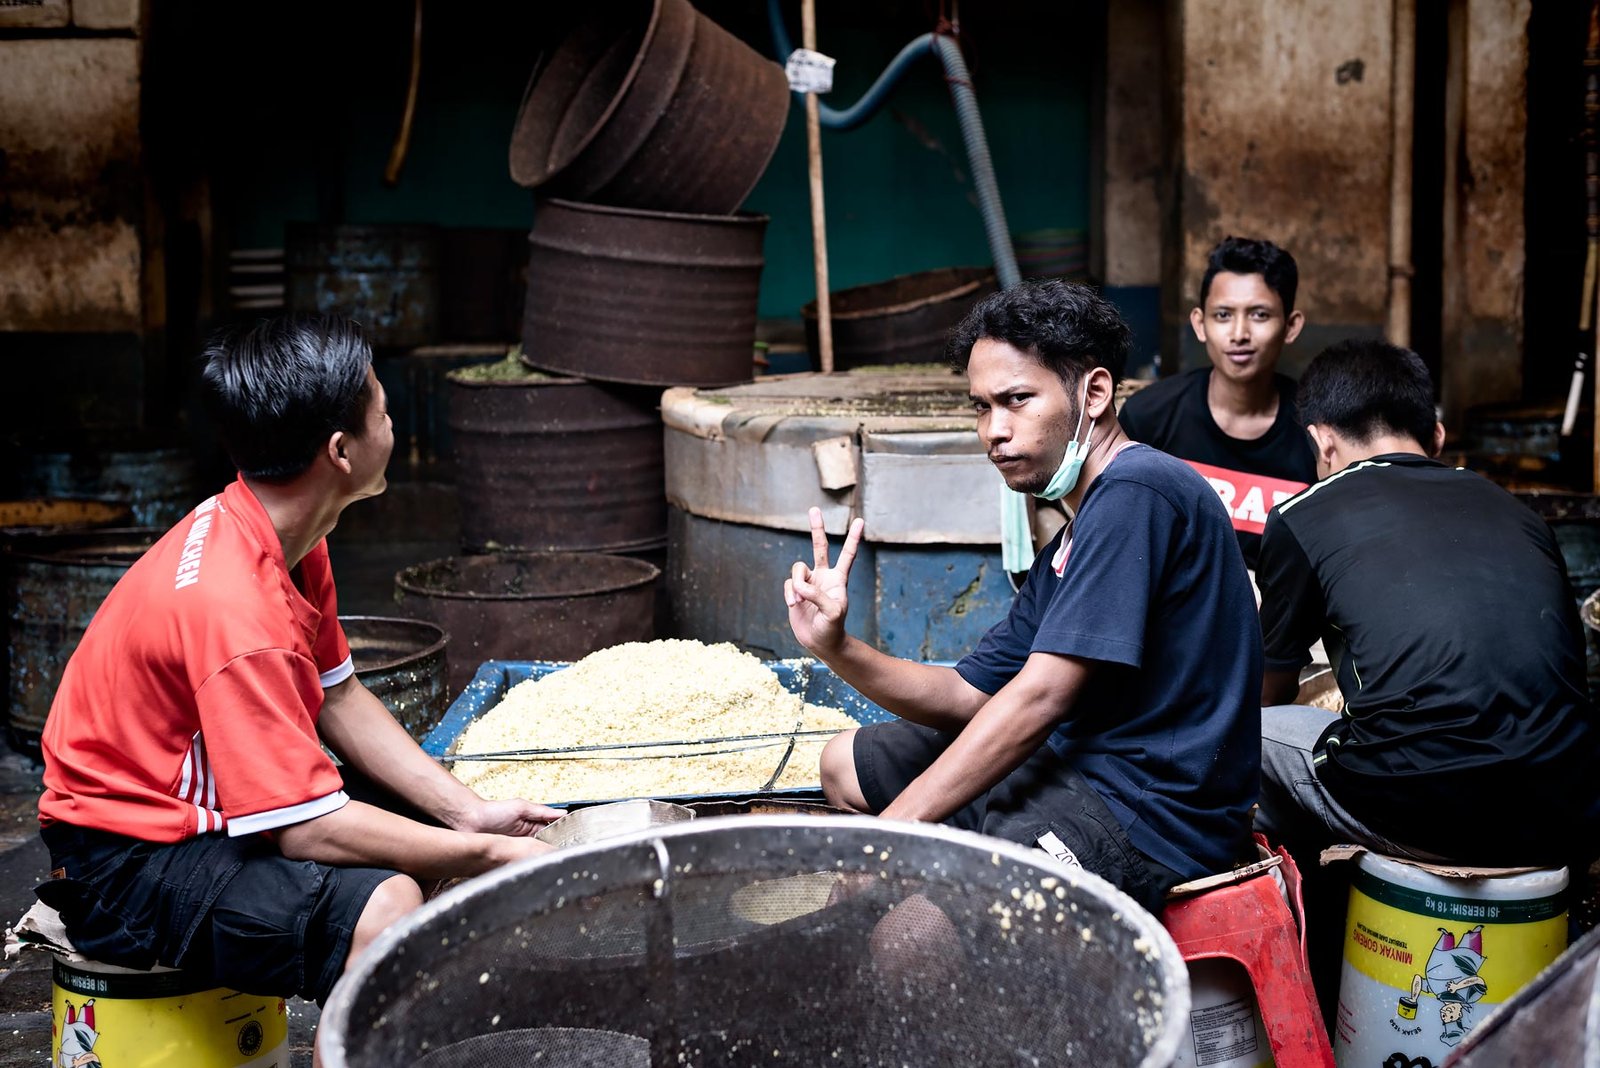 8 Interesting Things to Do and See in Yogyakarta | Indonesian Food Tour, Bakpia Factory